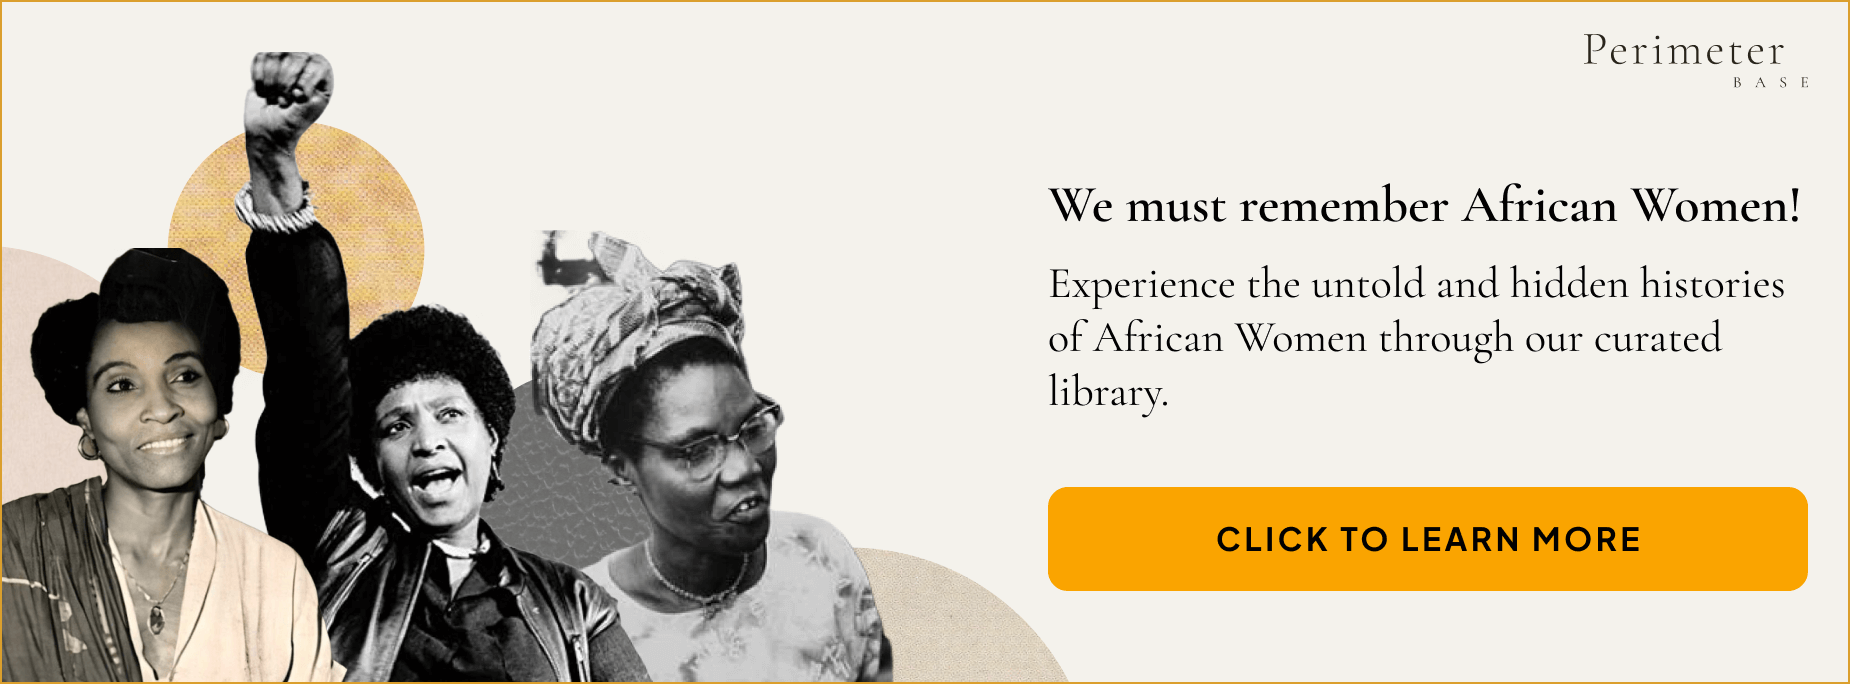 Banner: We must remember African Women! Experience the untold and hidden histories of African Women through our curated library. CLICK TO LEARN MORE.